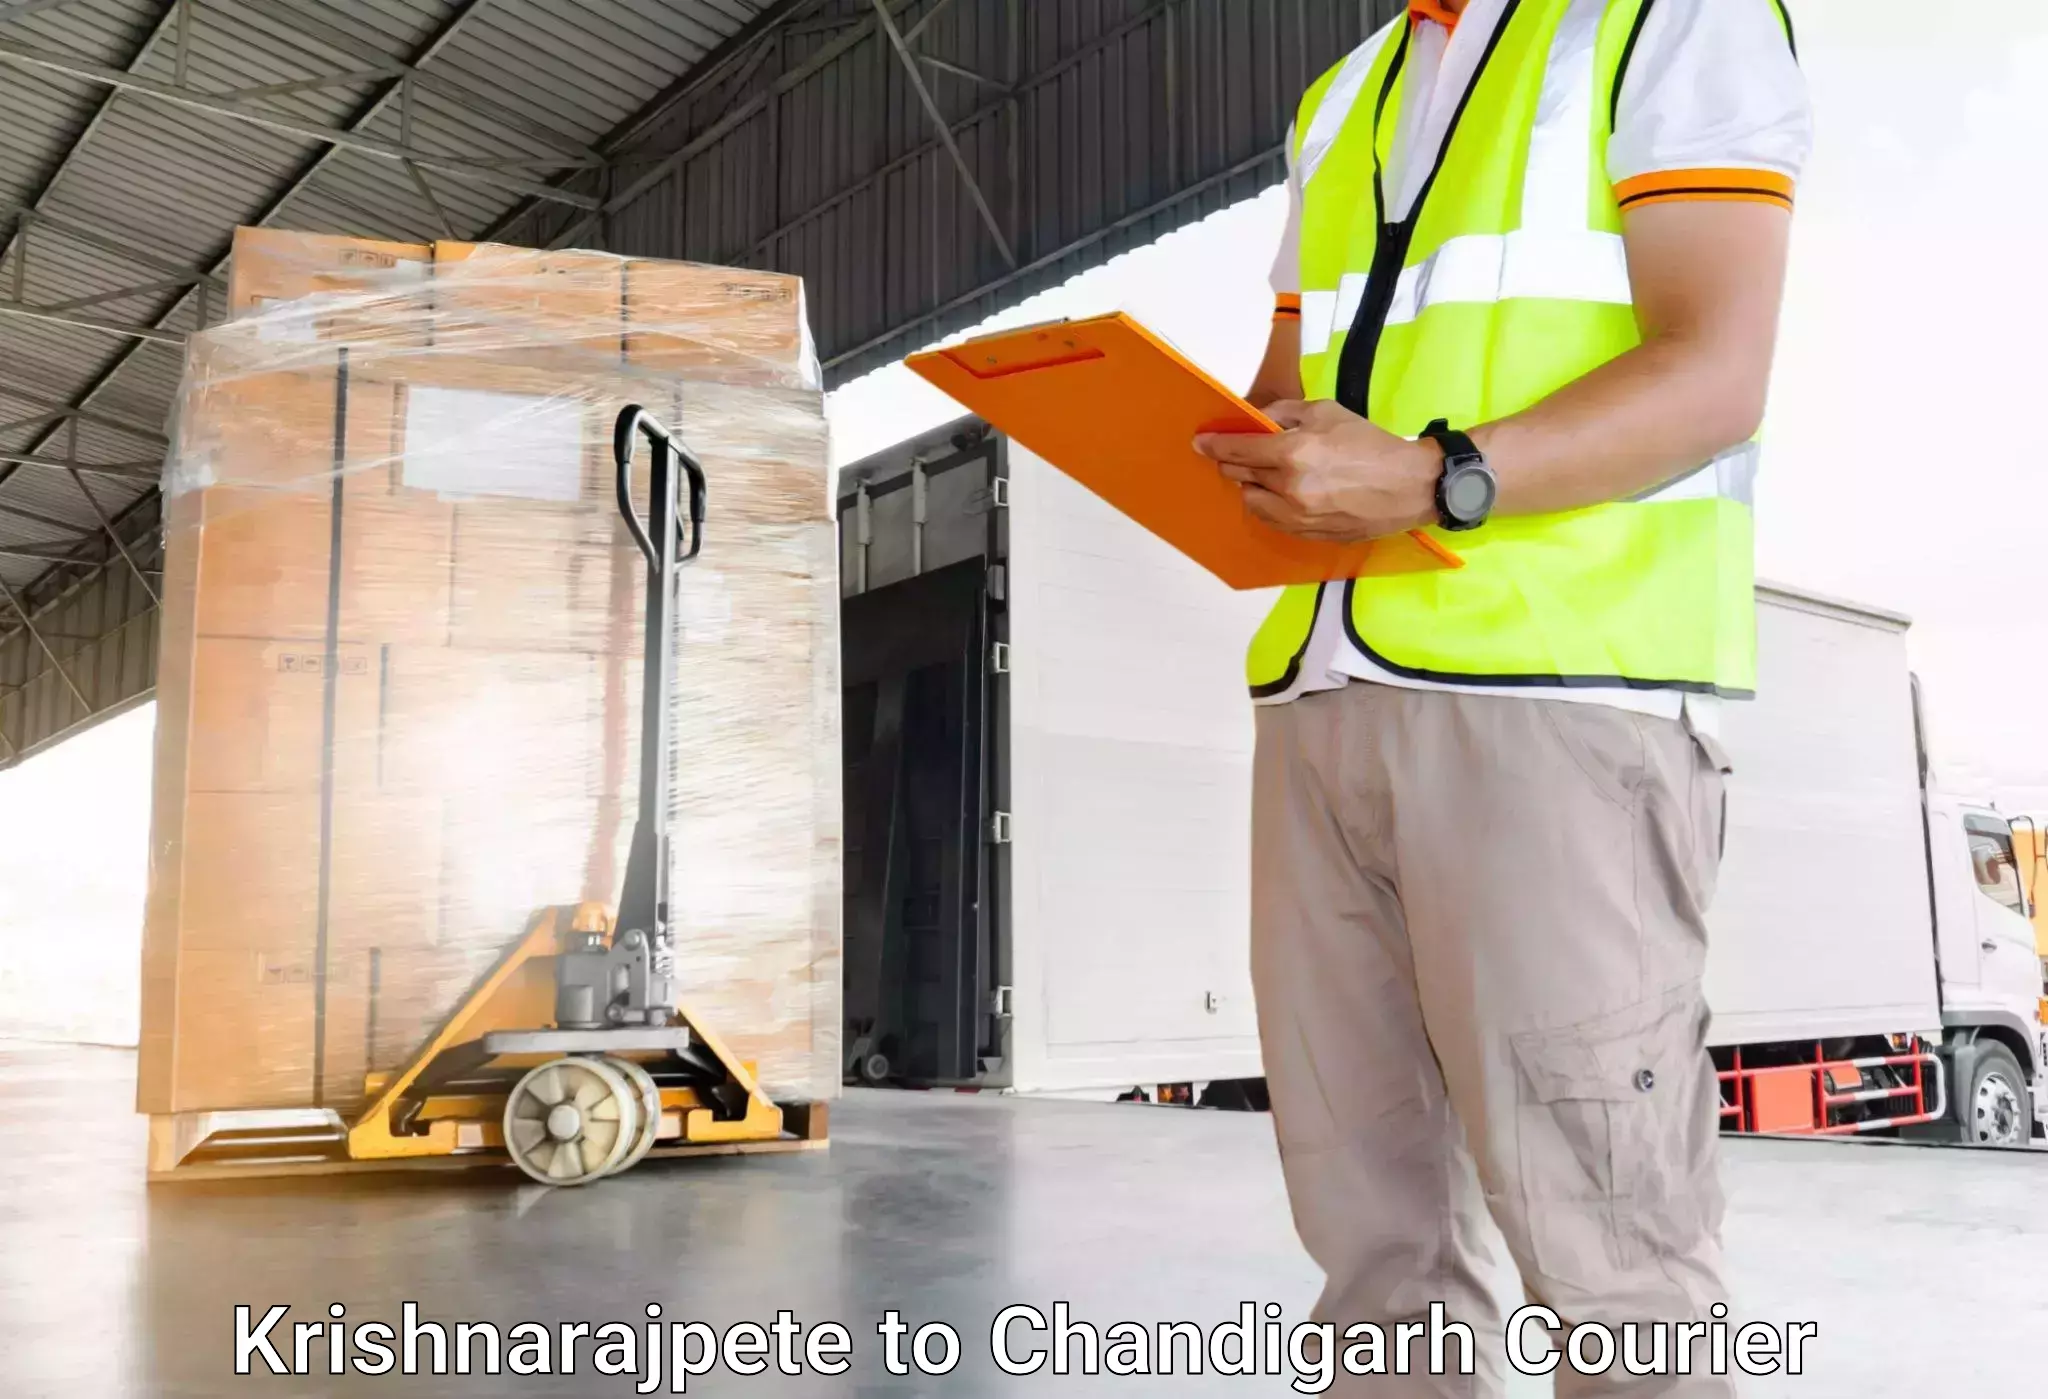 Luggage delivery system Krishnarajpete to Chandigarh